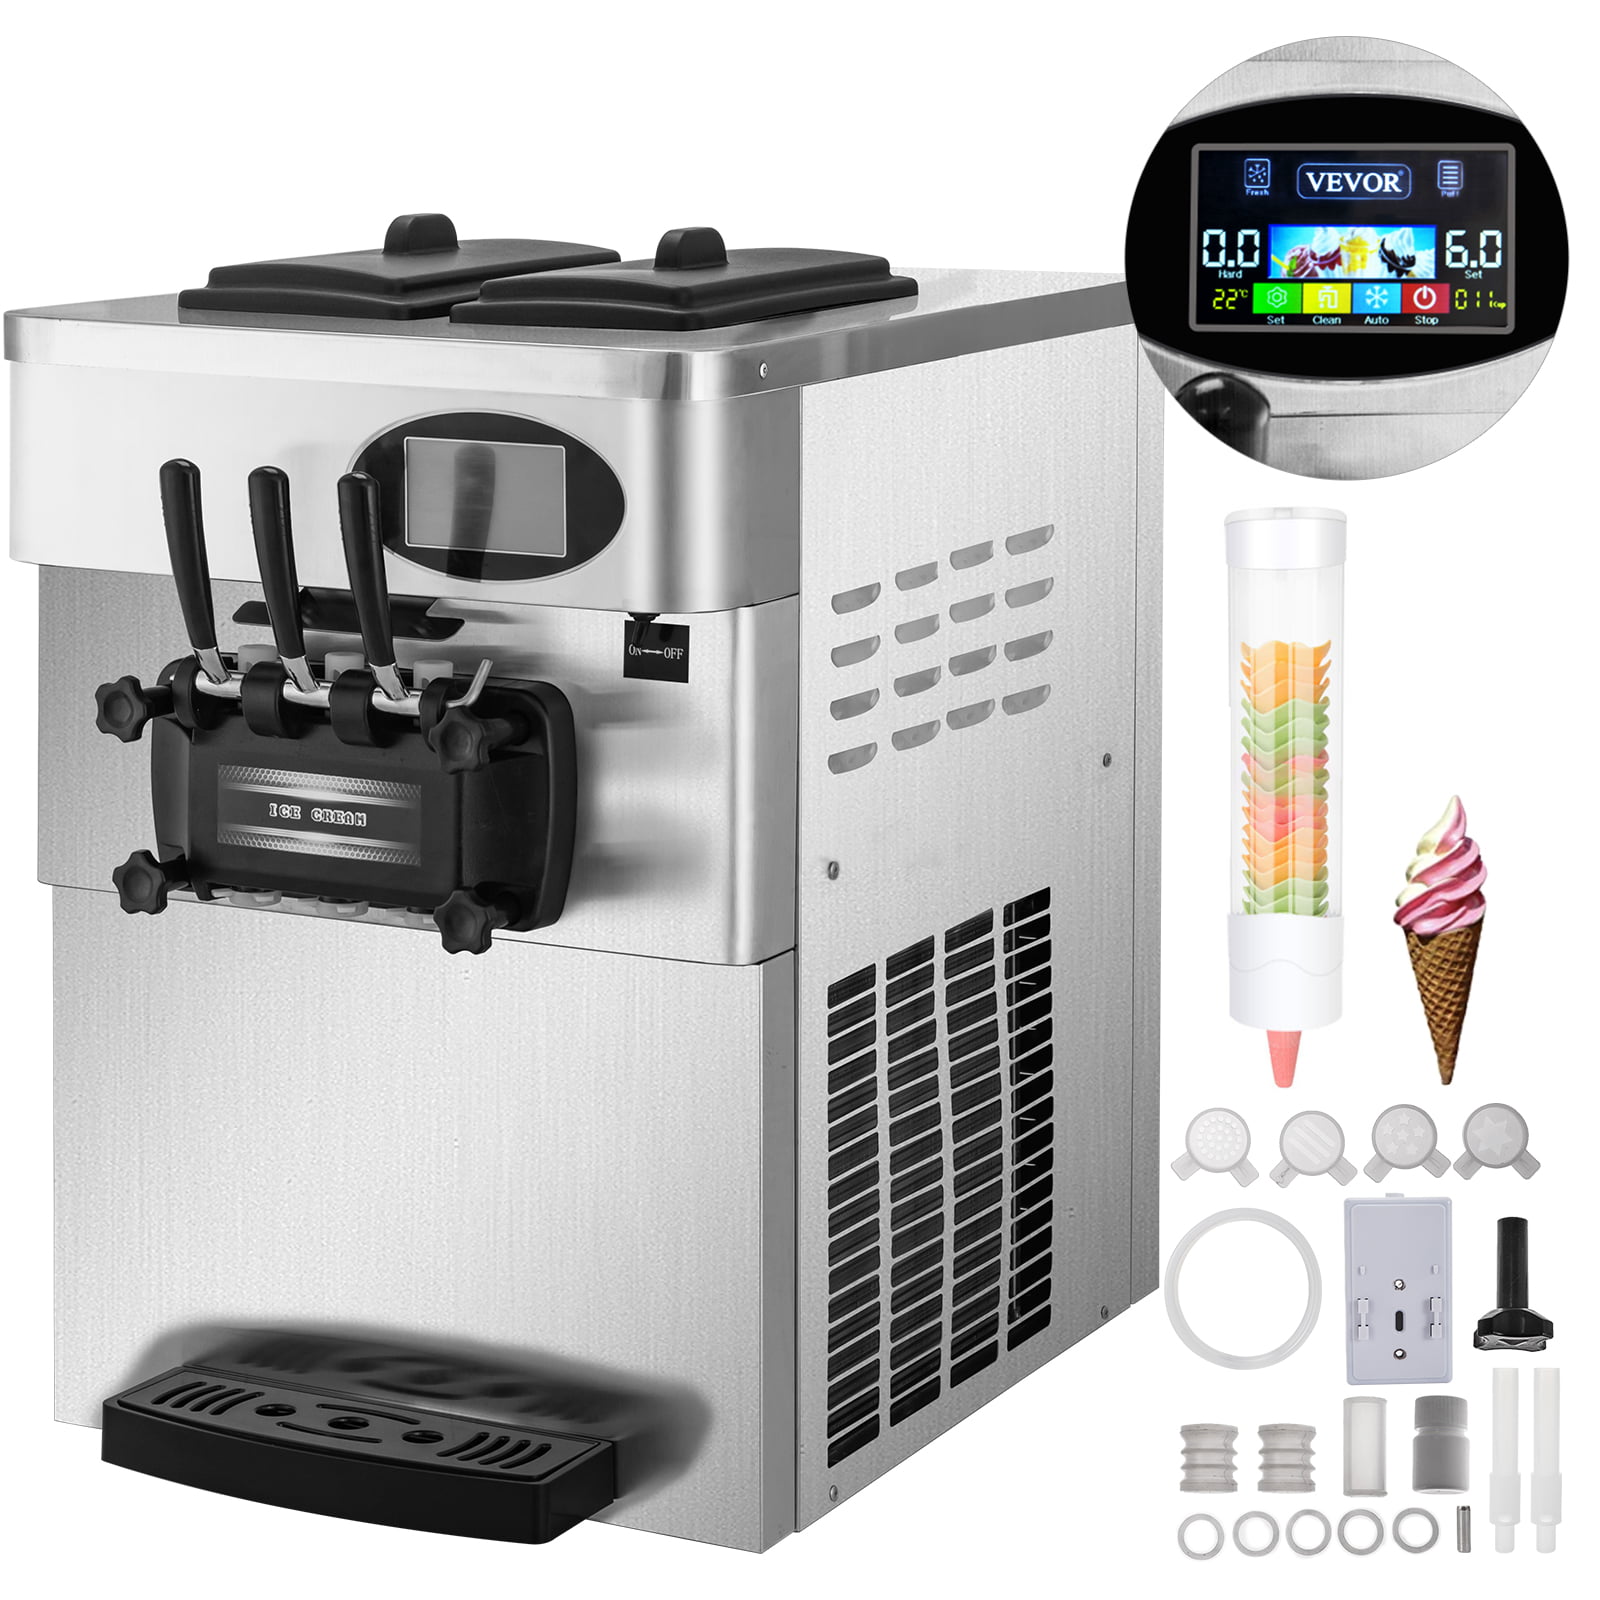 Vevor 2200w Commercial Soft Ice Cream Machine 3 Flavors 5 3 To 7 4